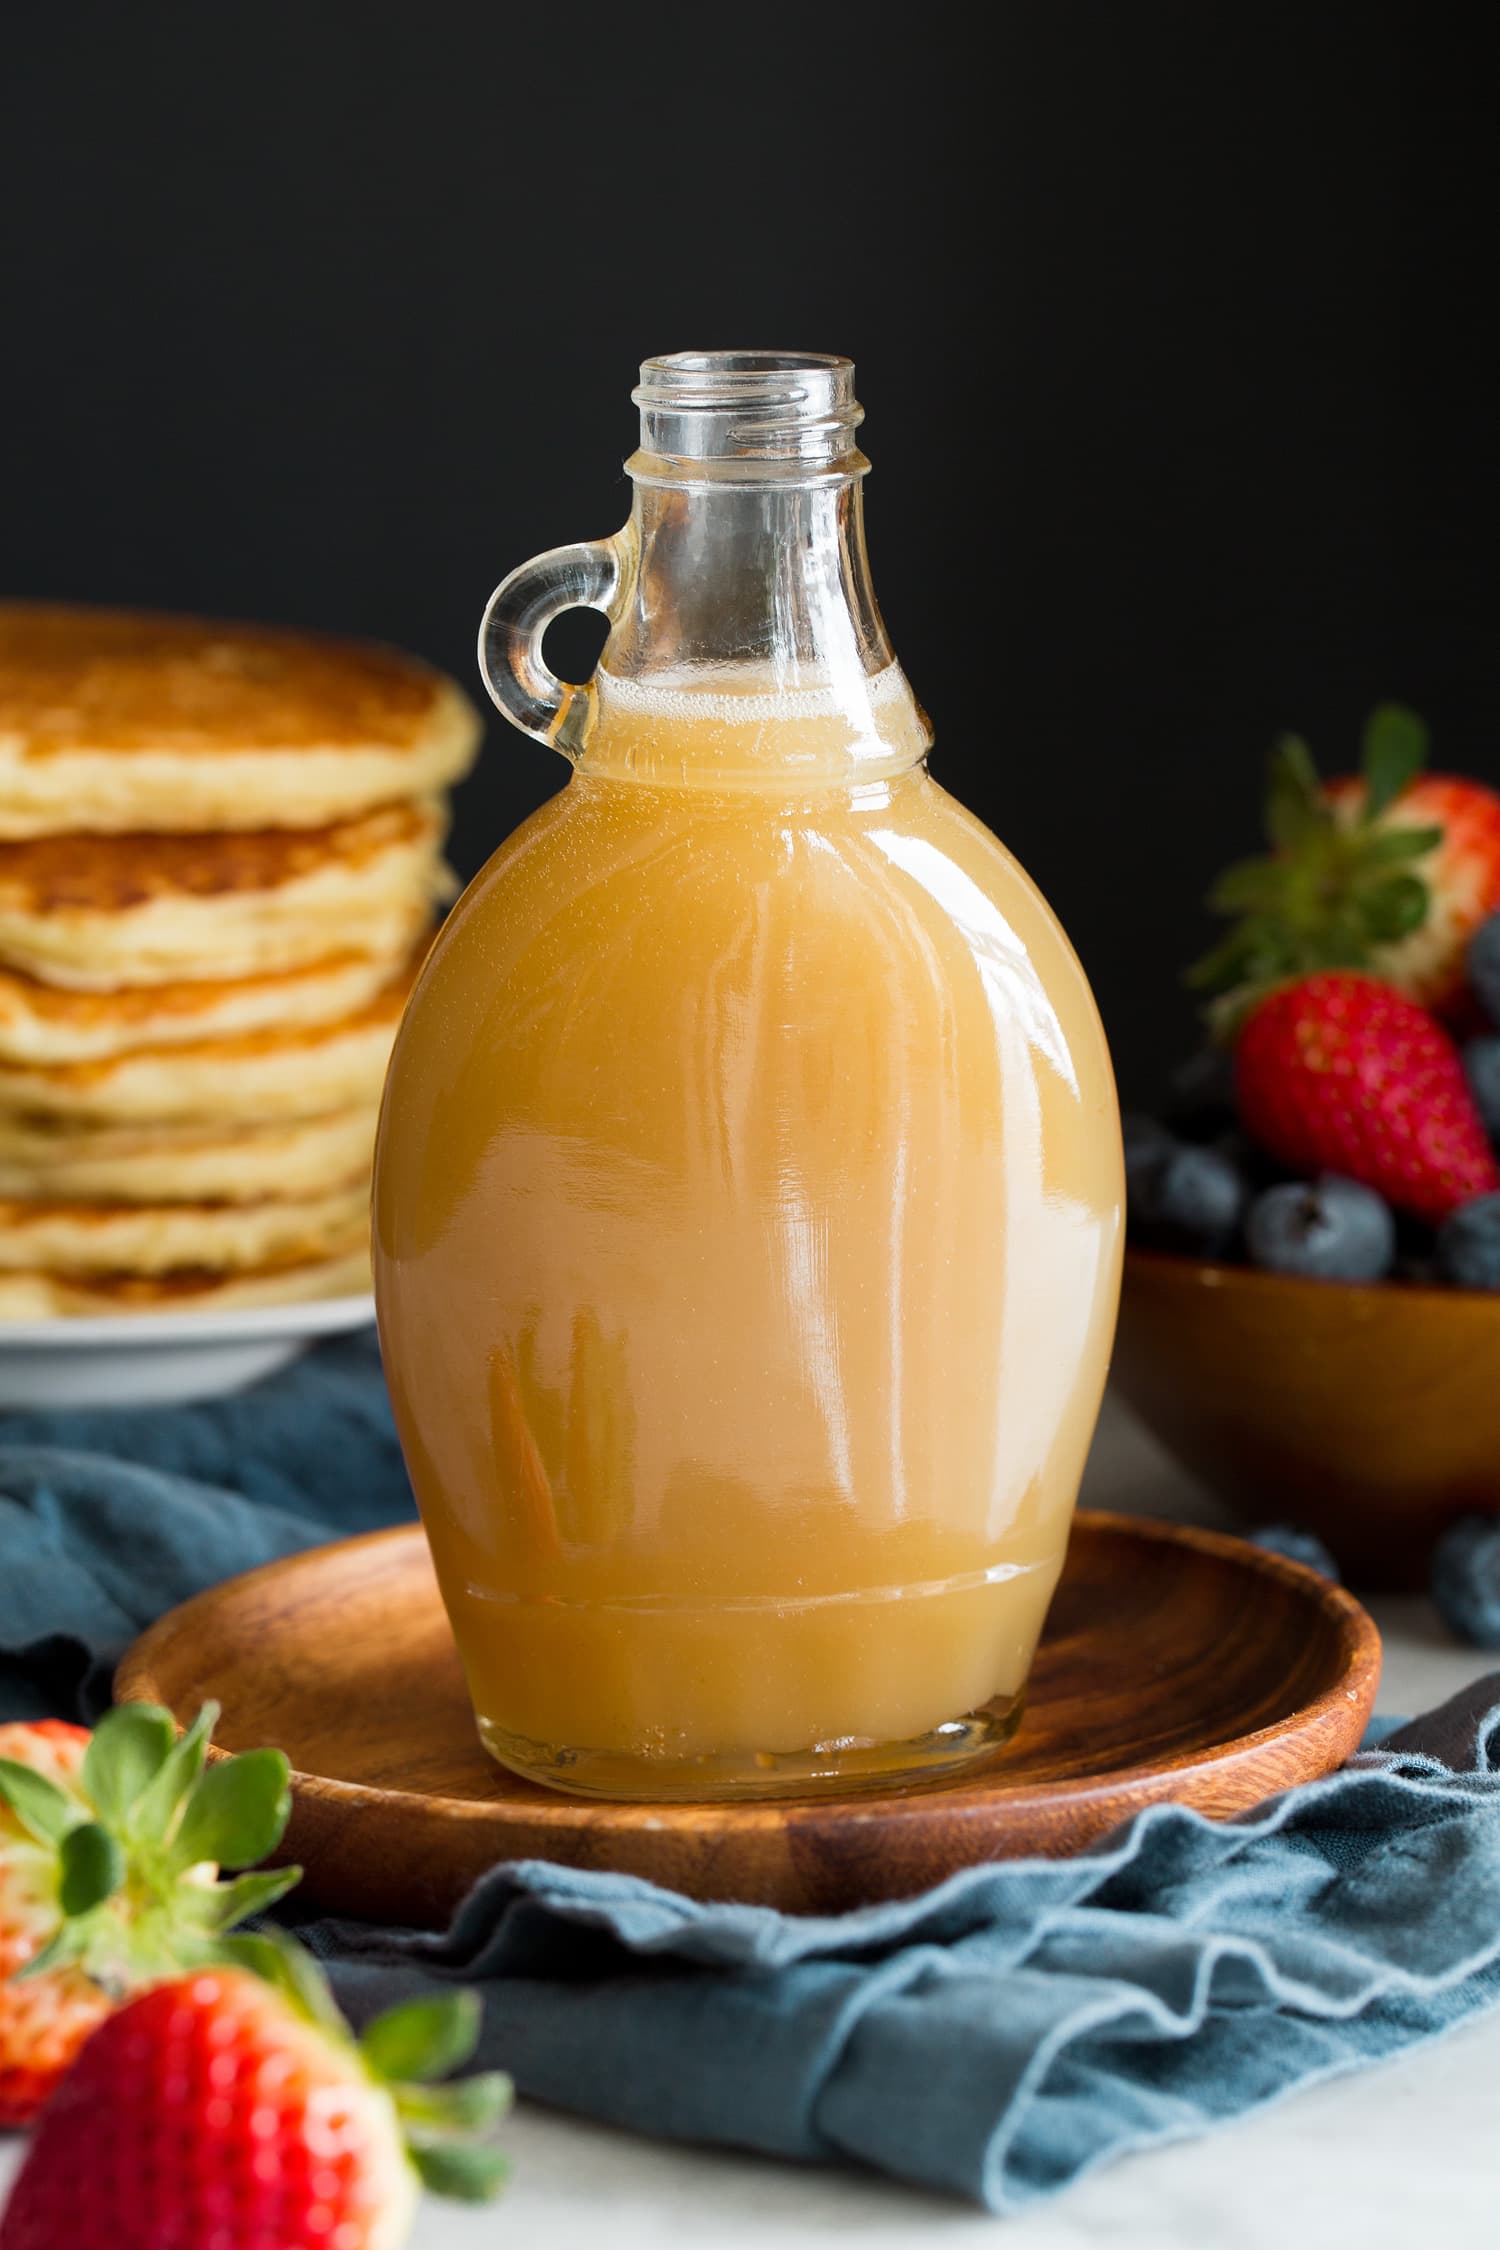 Homemade buttermilk syrup in a glass jar.